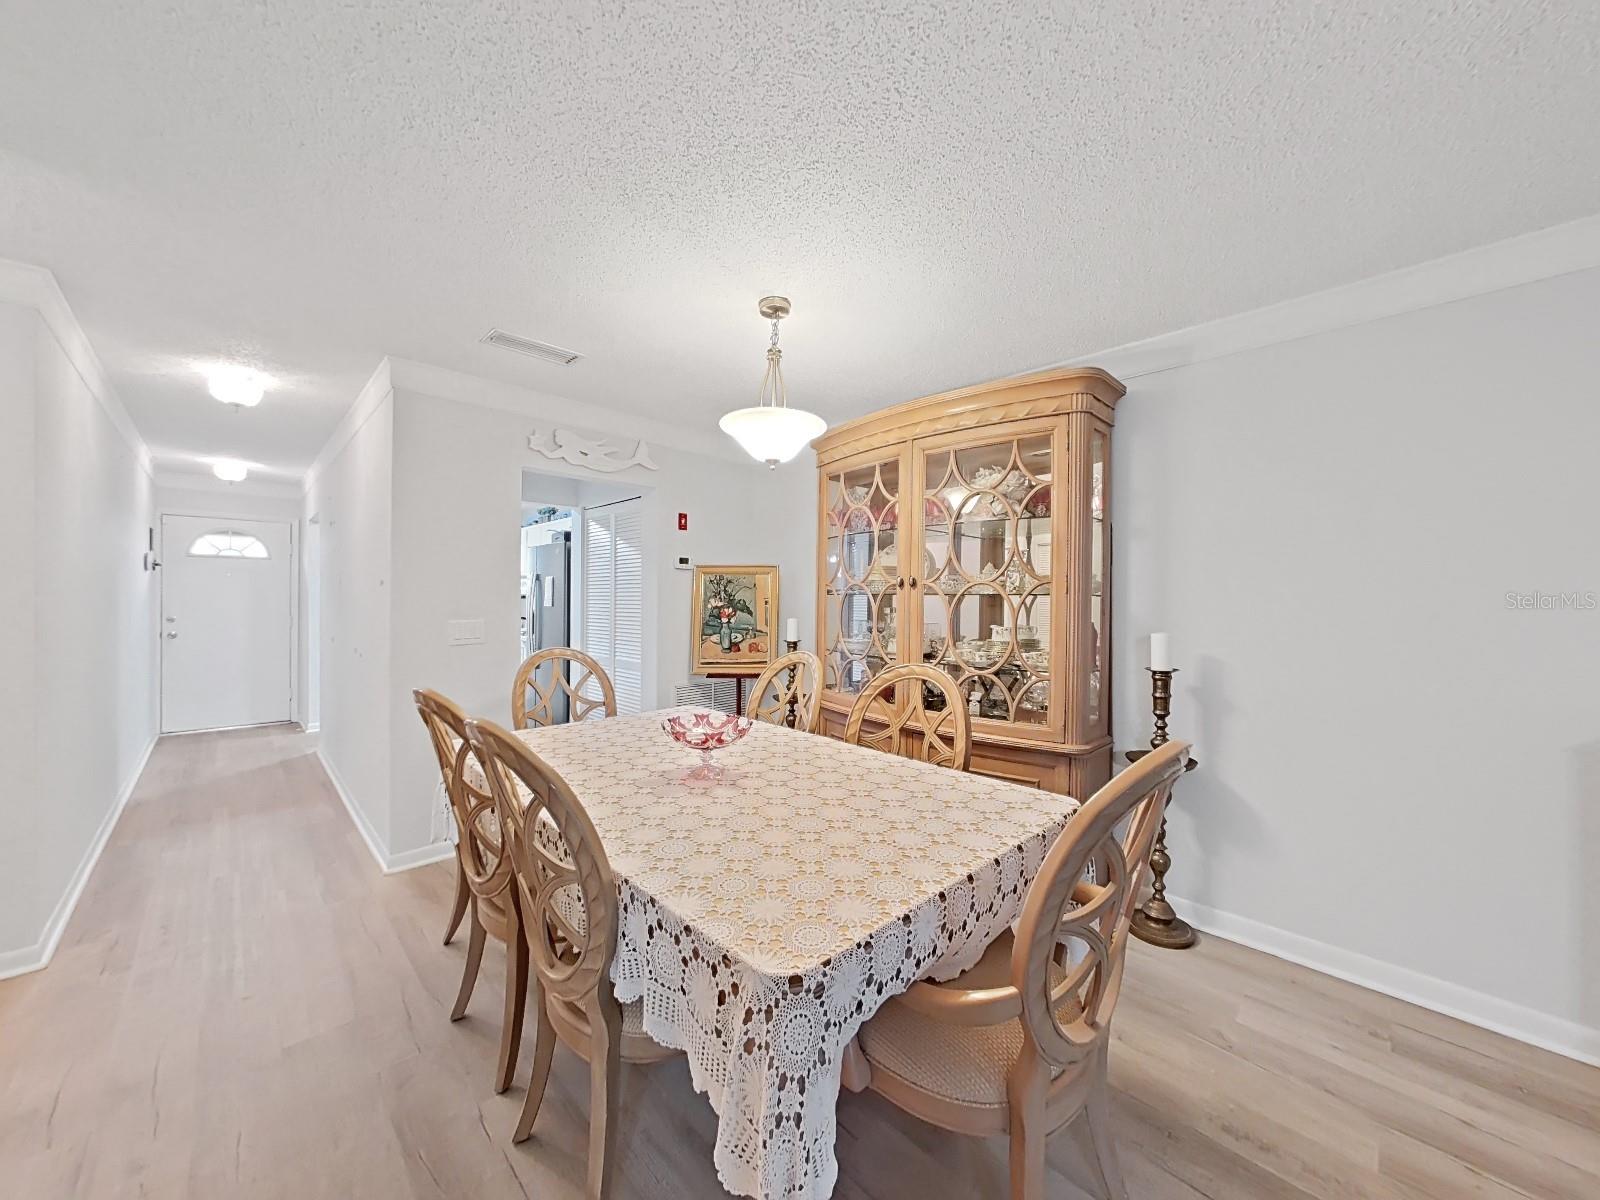 Plenty of space for a family dining table and seating!